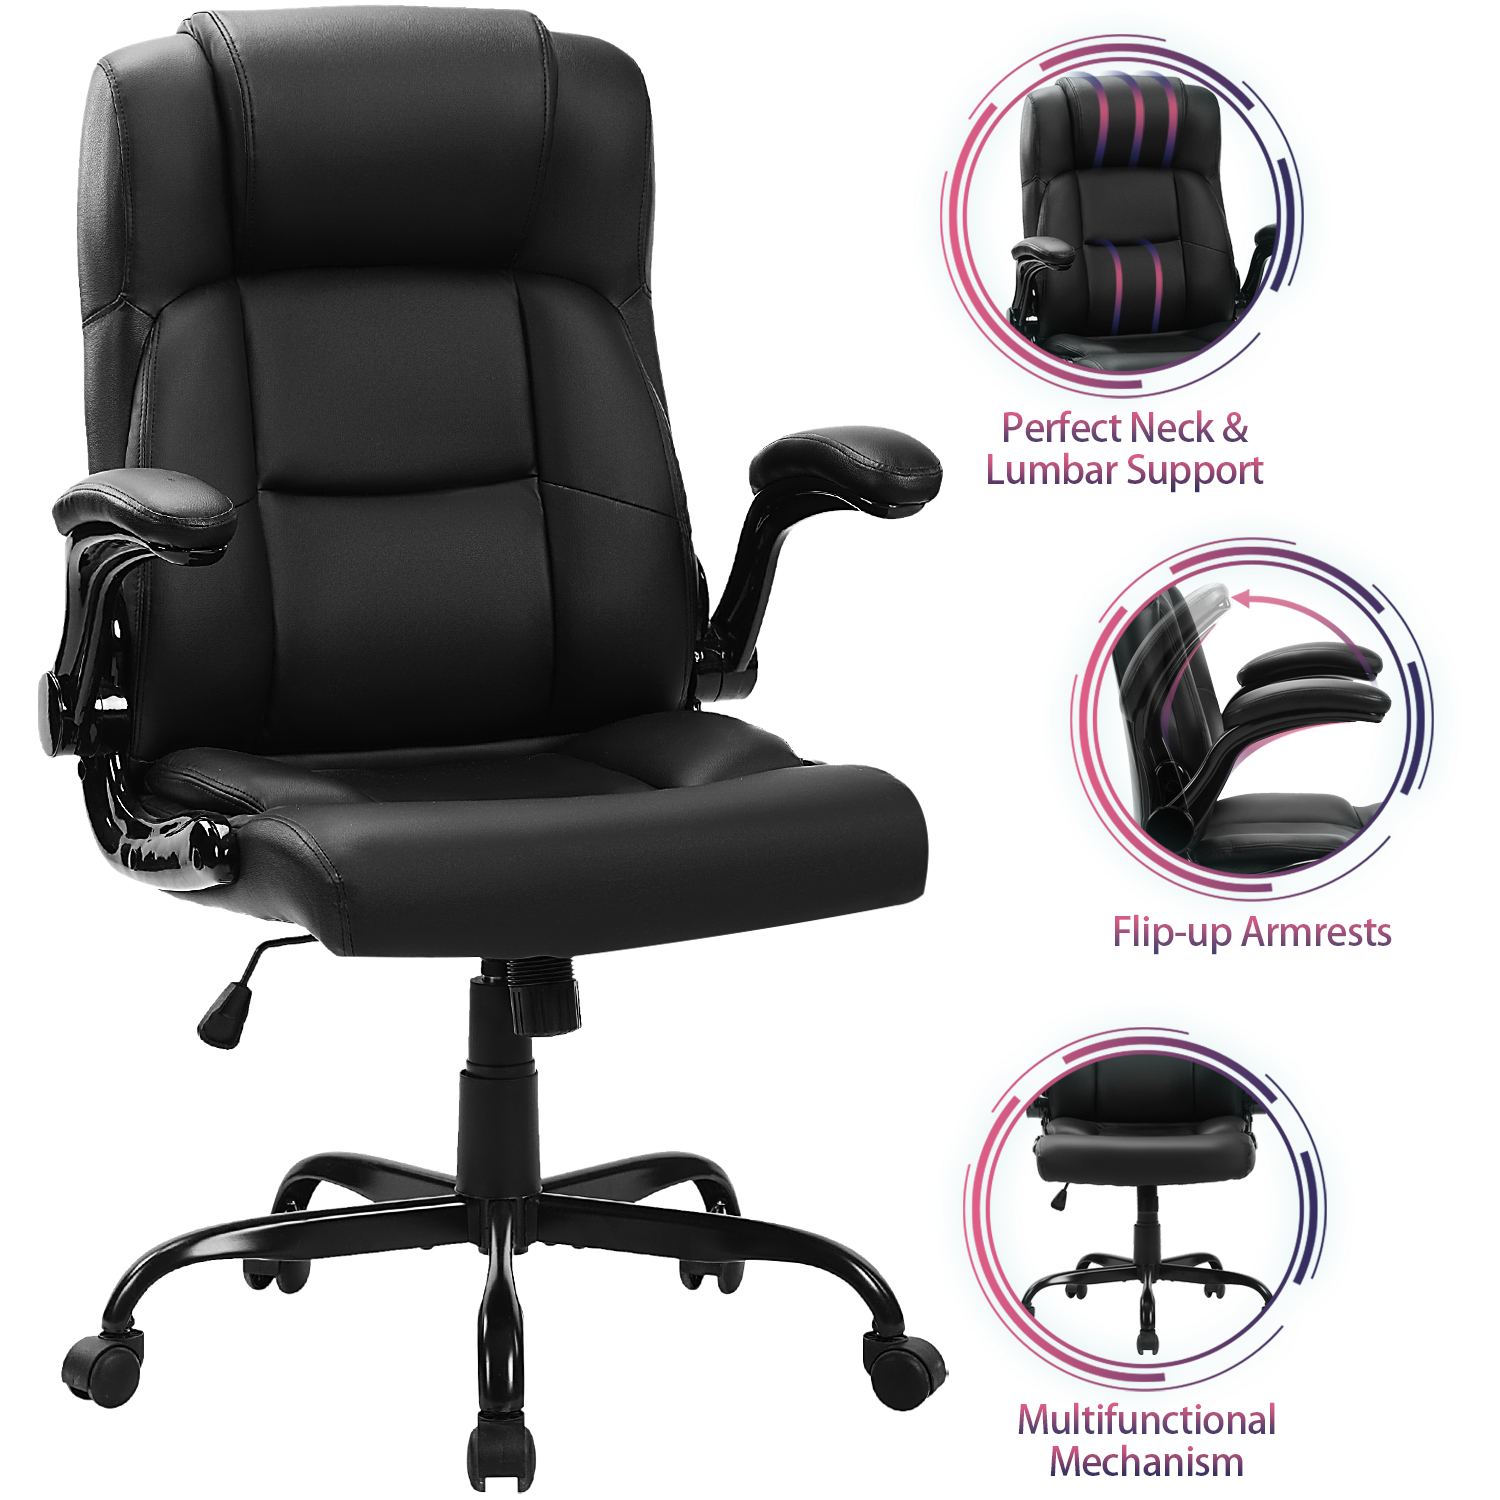 JONPONY Big and Tall Office Chair 400LBS Wide Seat Ergonomic Computer Desk Chair High Back Executive Leather Chair Adjustable Task Chair Lumbar Back Support 8 Hours Heavy Duty Design,Black - image 4 of 9